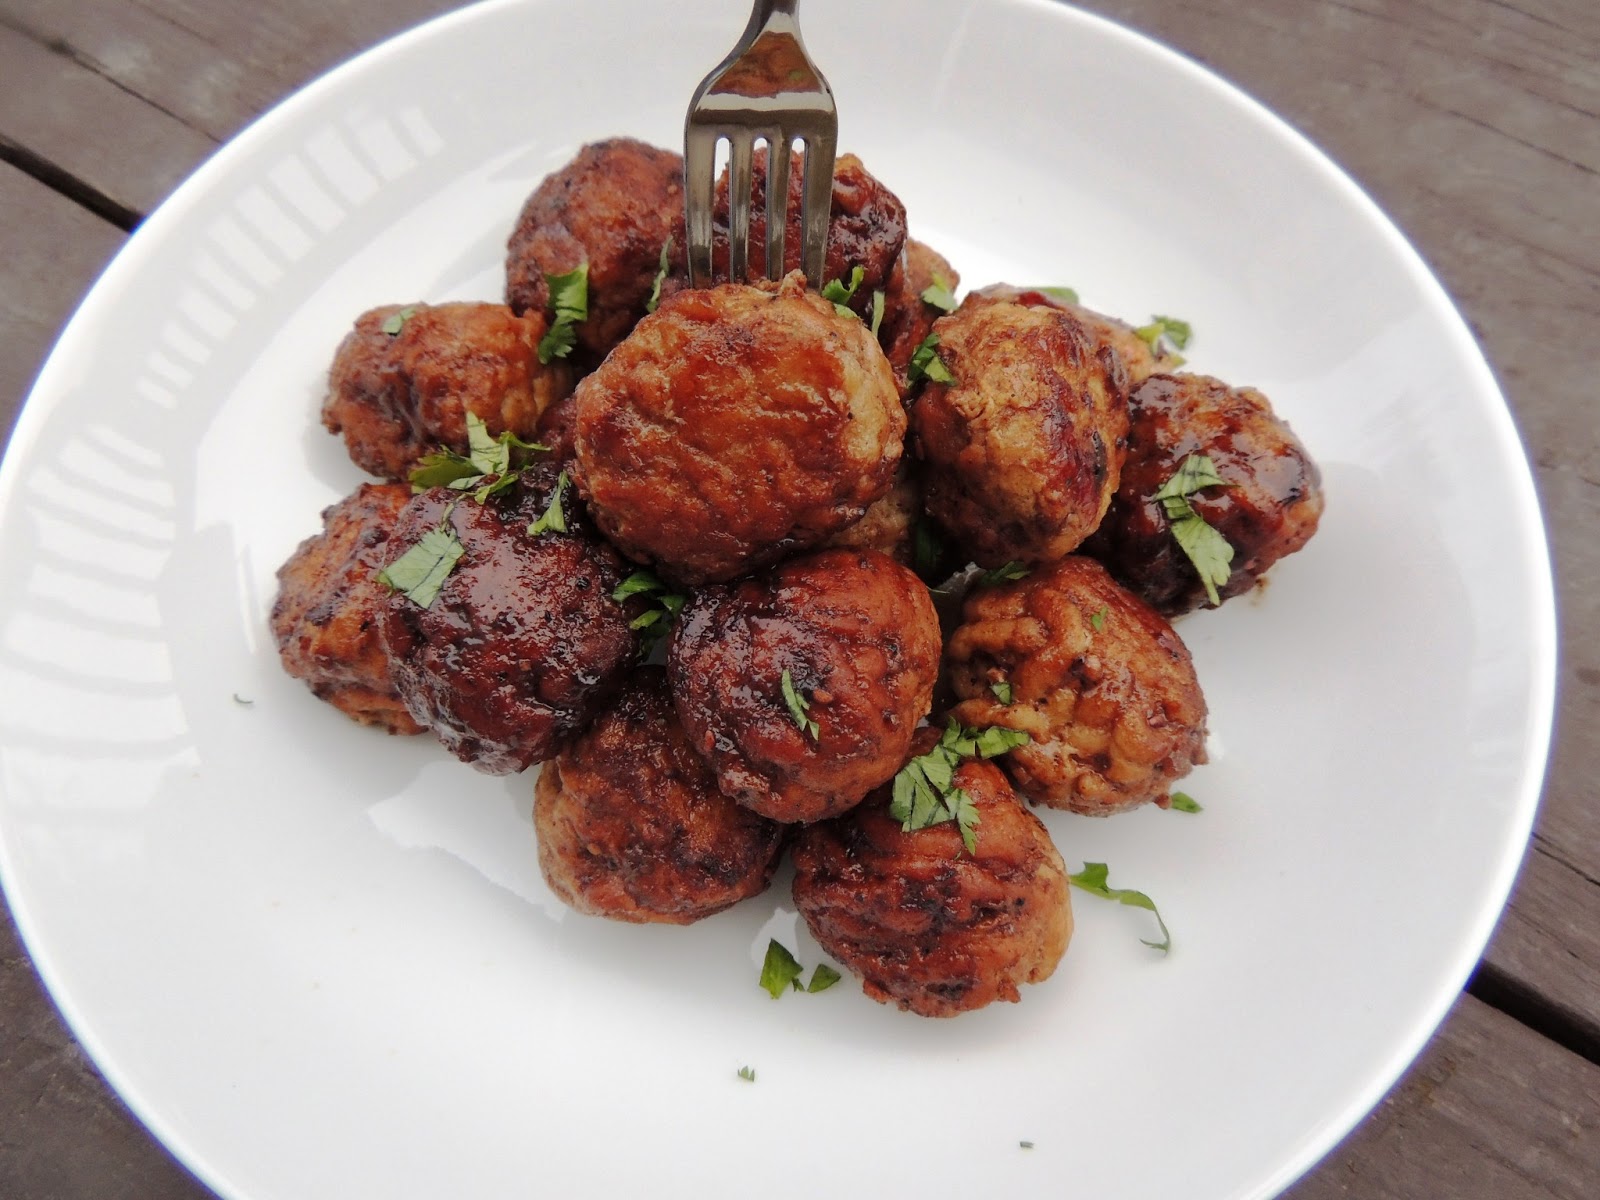 Leave a Happy Plate: Raspberry Balsamic Chicken Meatballs